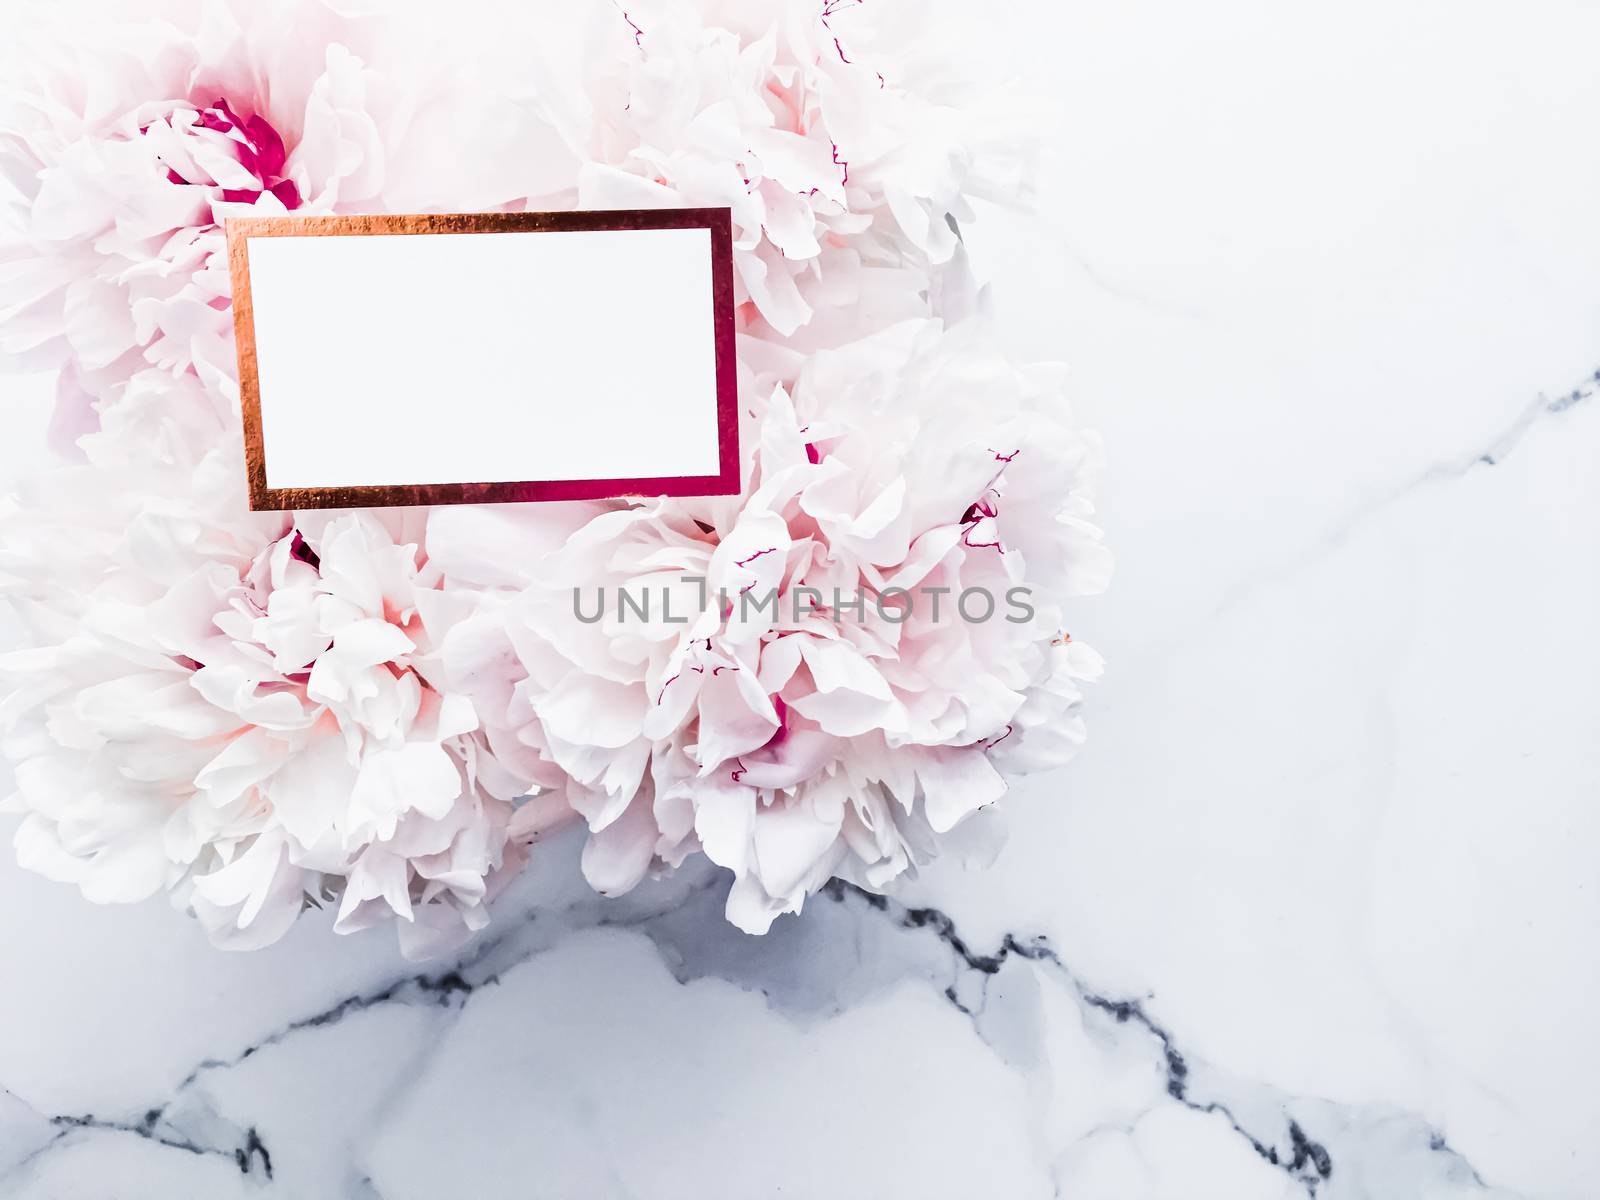 Glamorous business card or invitation mockup and bouquet of peony flowers, wedding and event branding design